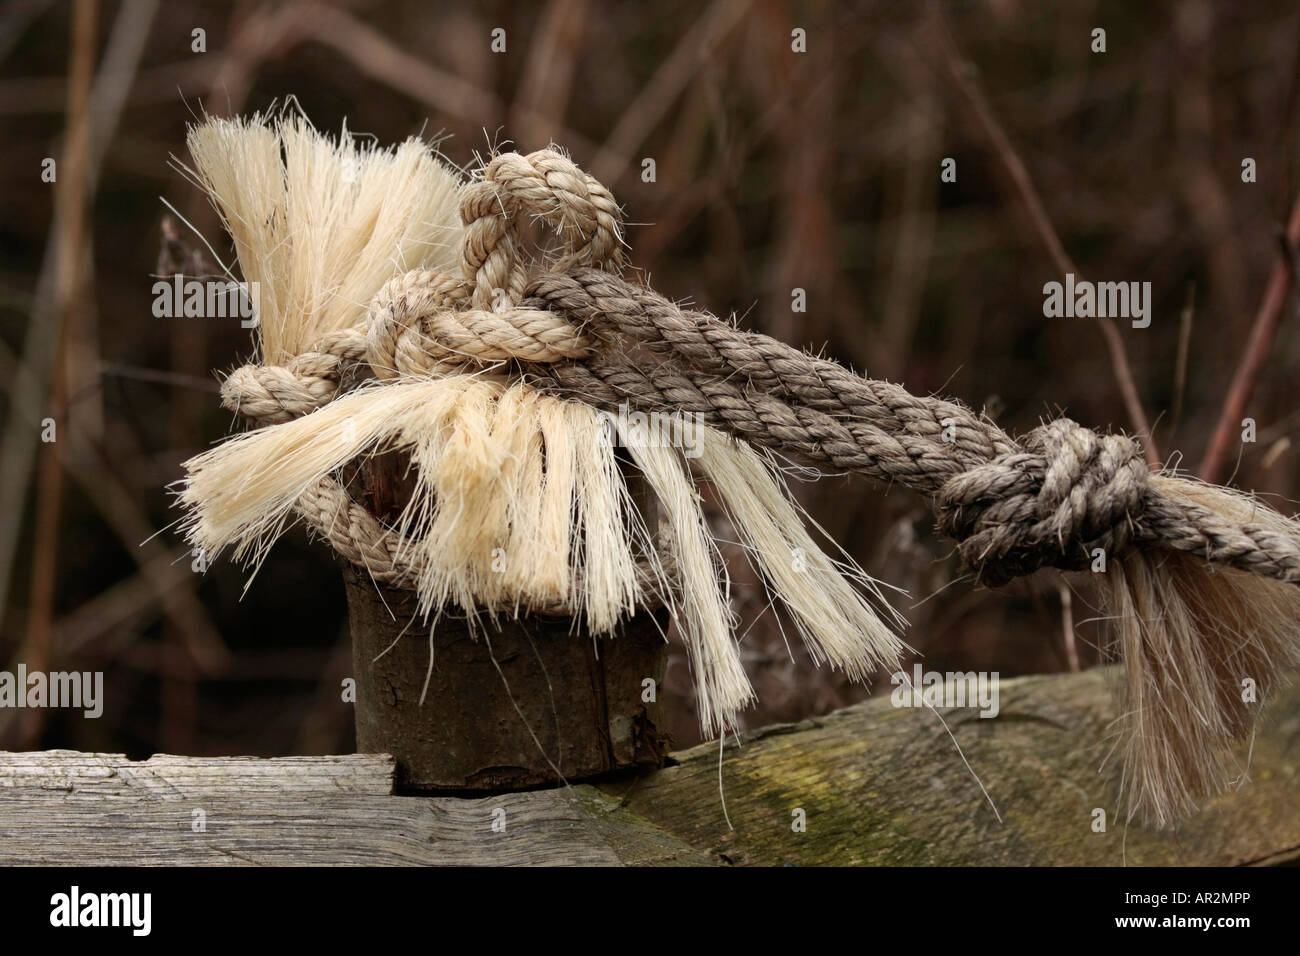 Rope tied to wooden fence post to strengthen it Stock Photo